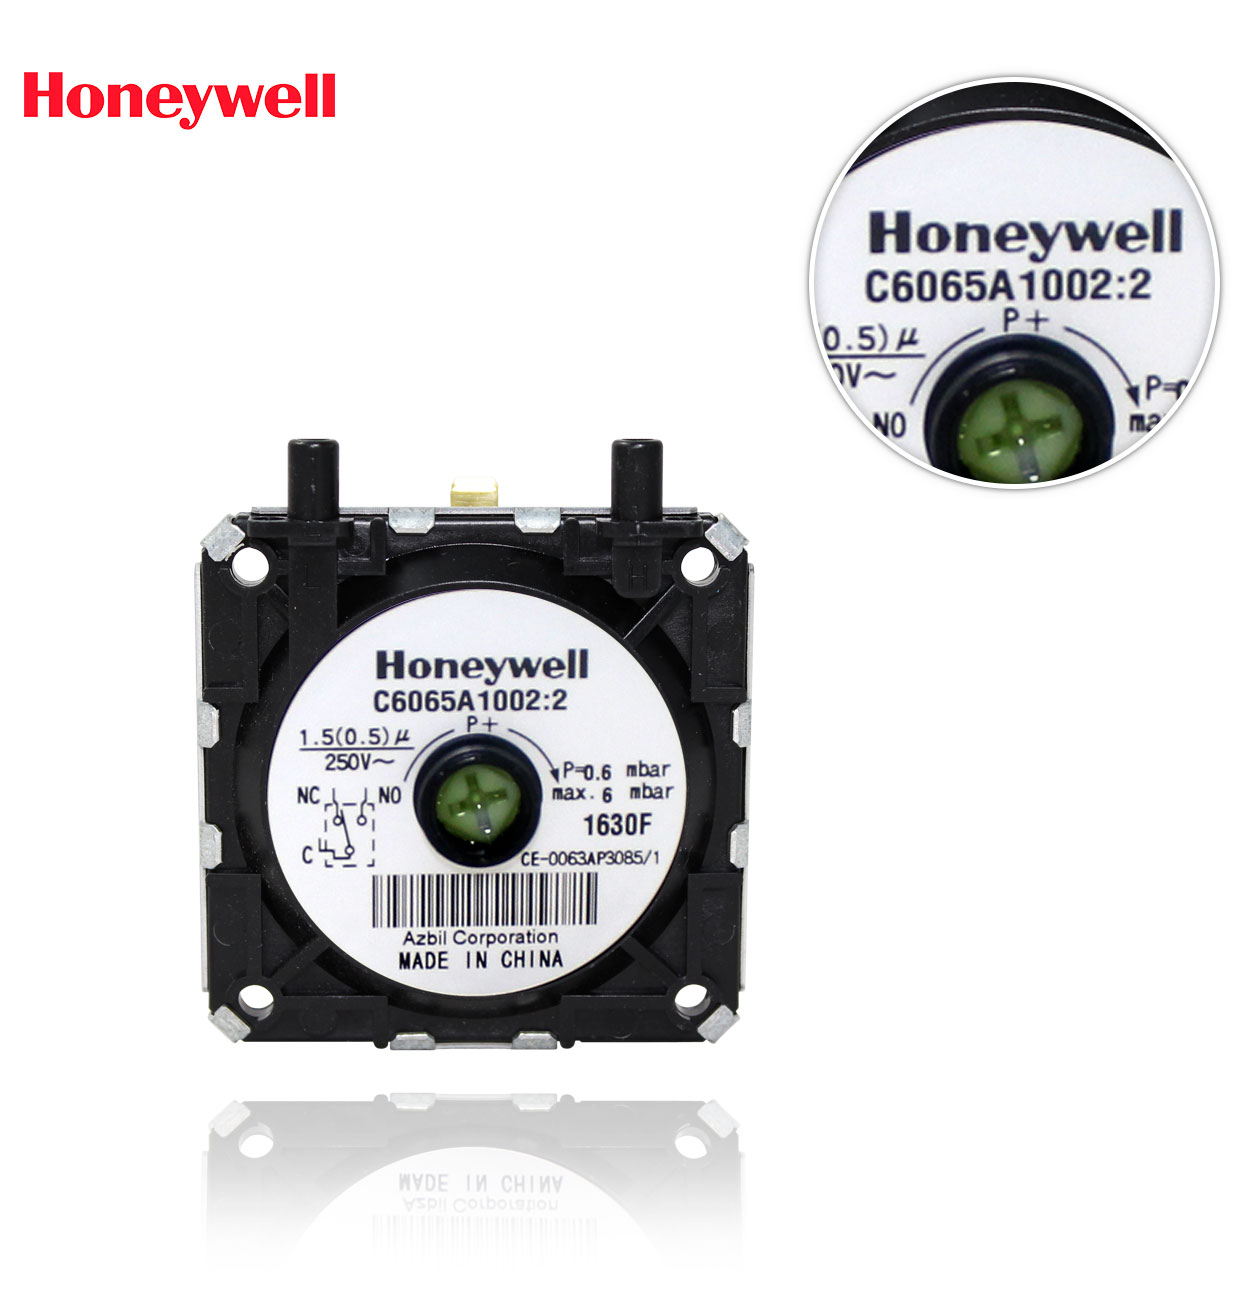 C 6065 A 1002 HONEYWELL DIFFERENTIAL PRESSURE SWITCH